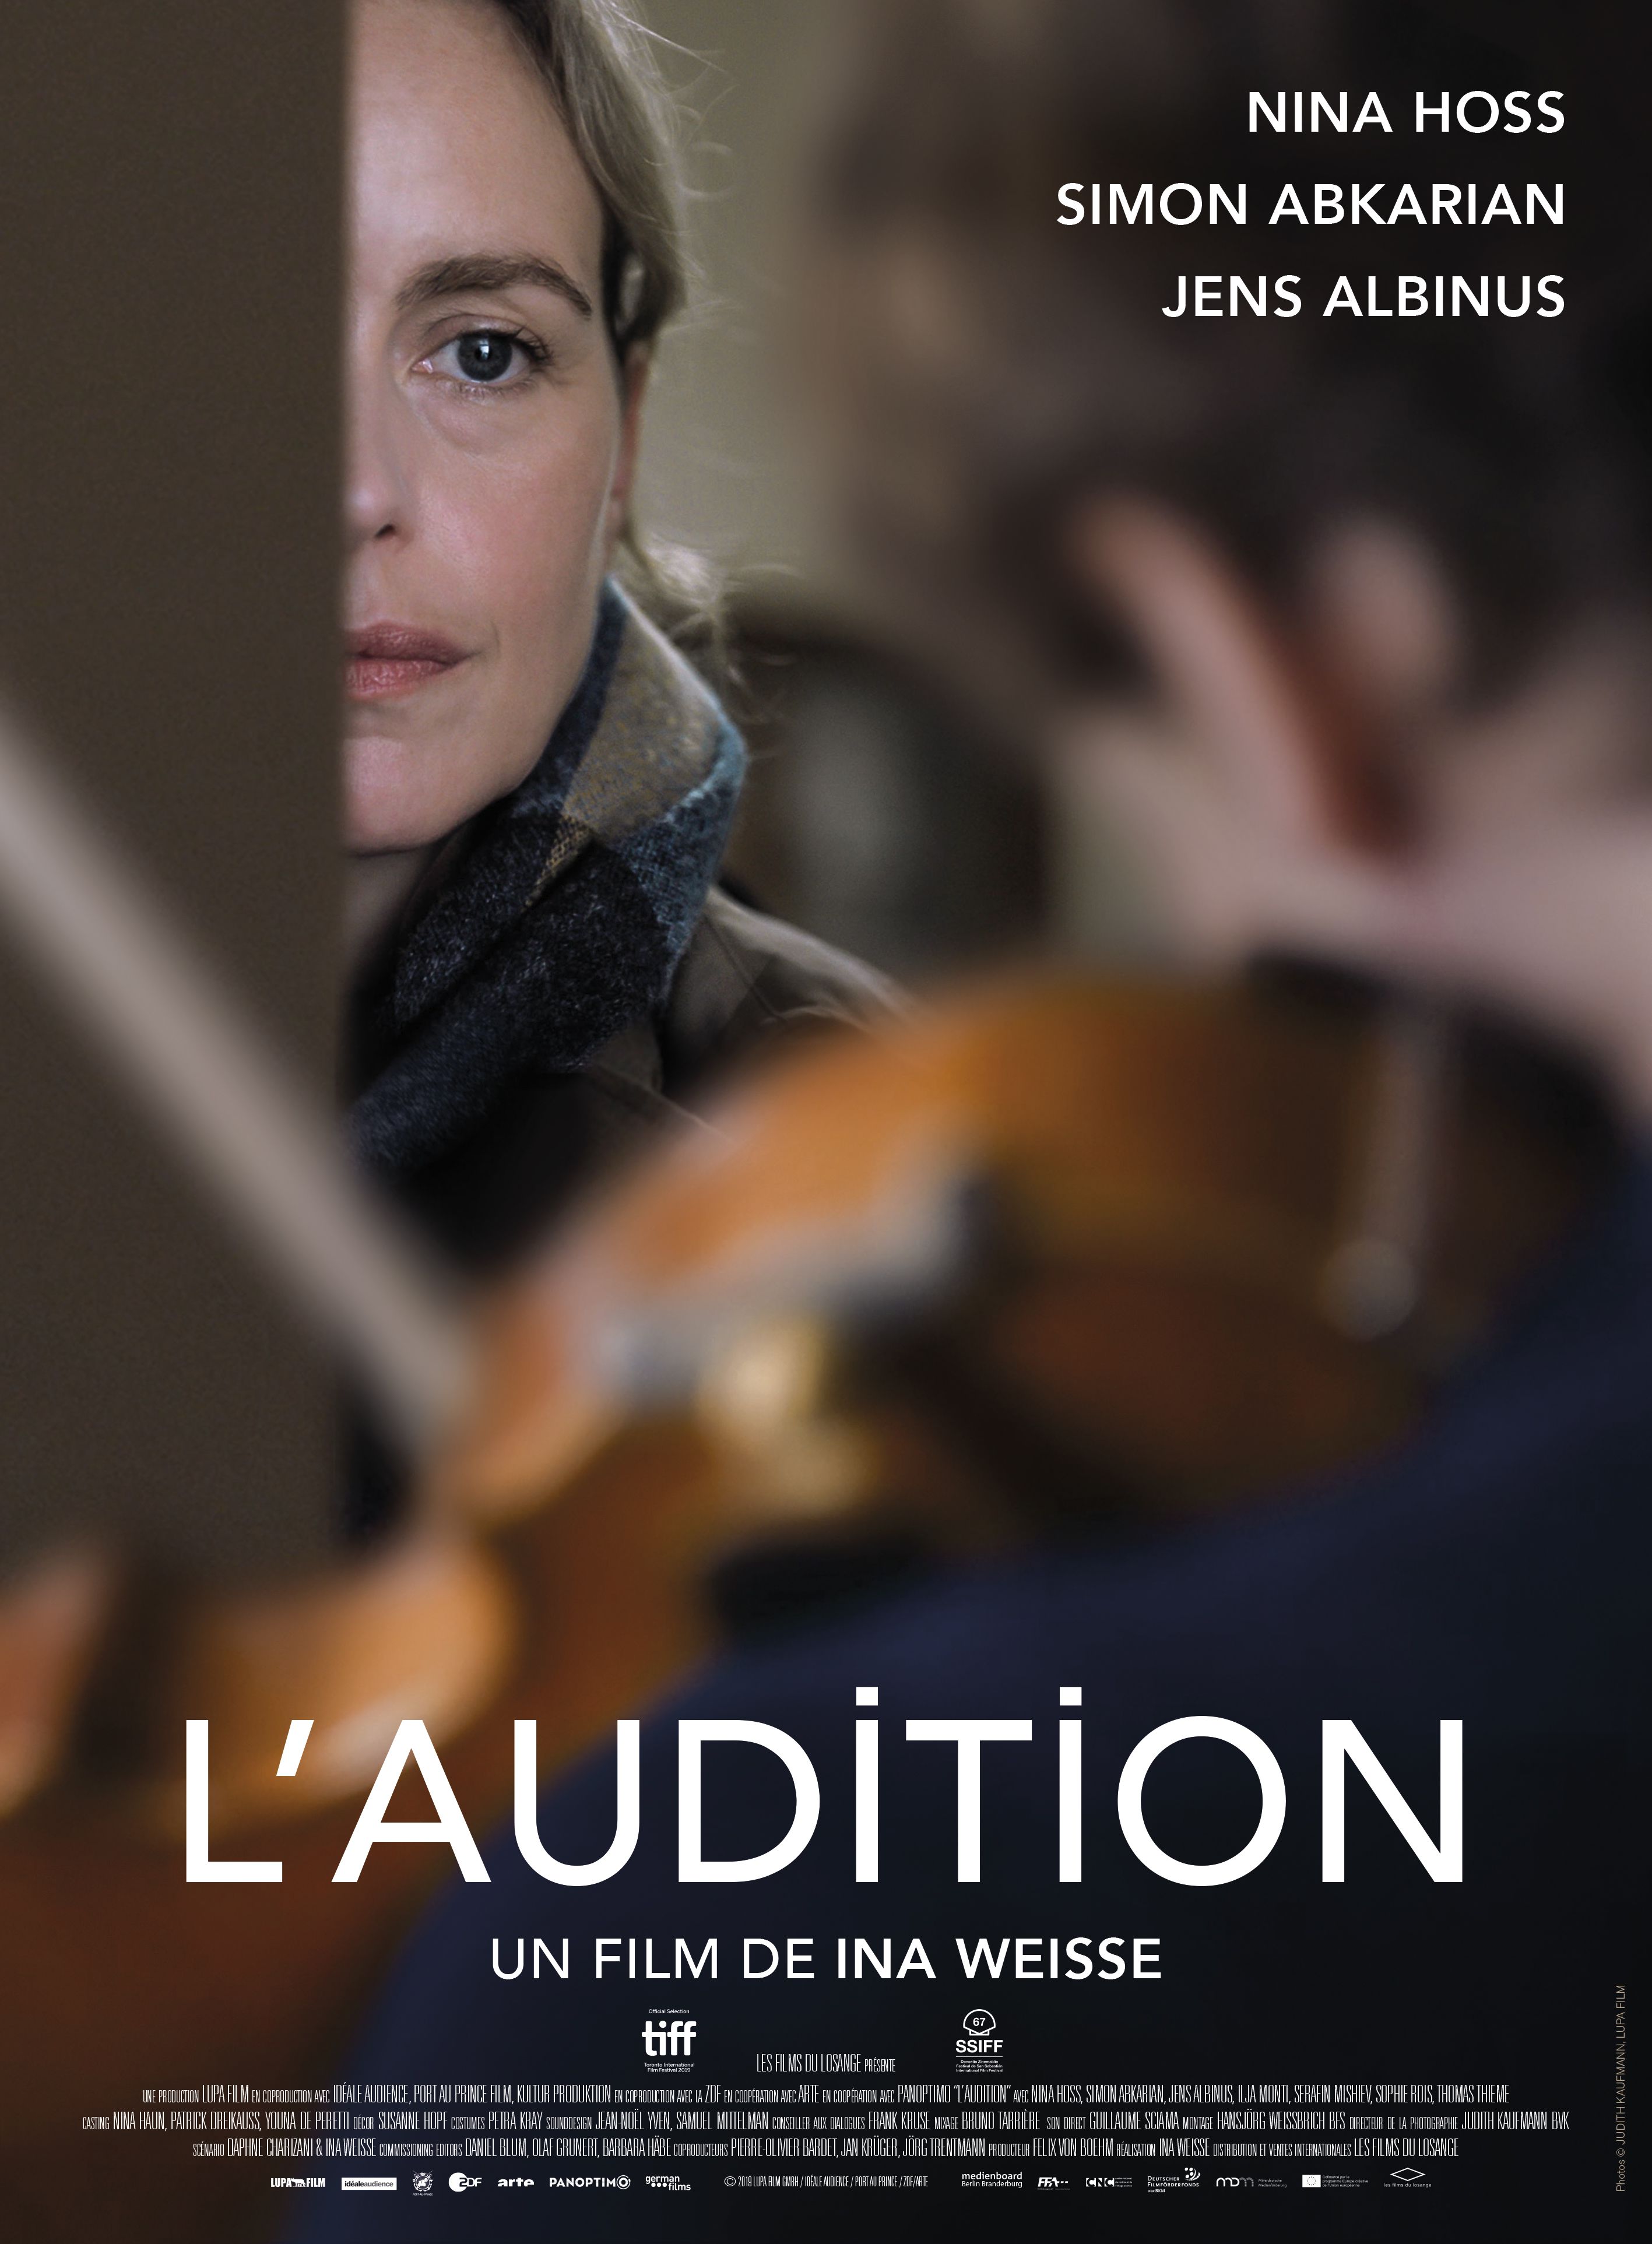 L'Audition - Film (2019) streaming VF gratuit complet